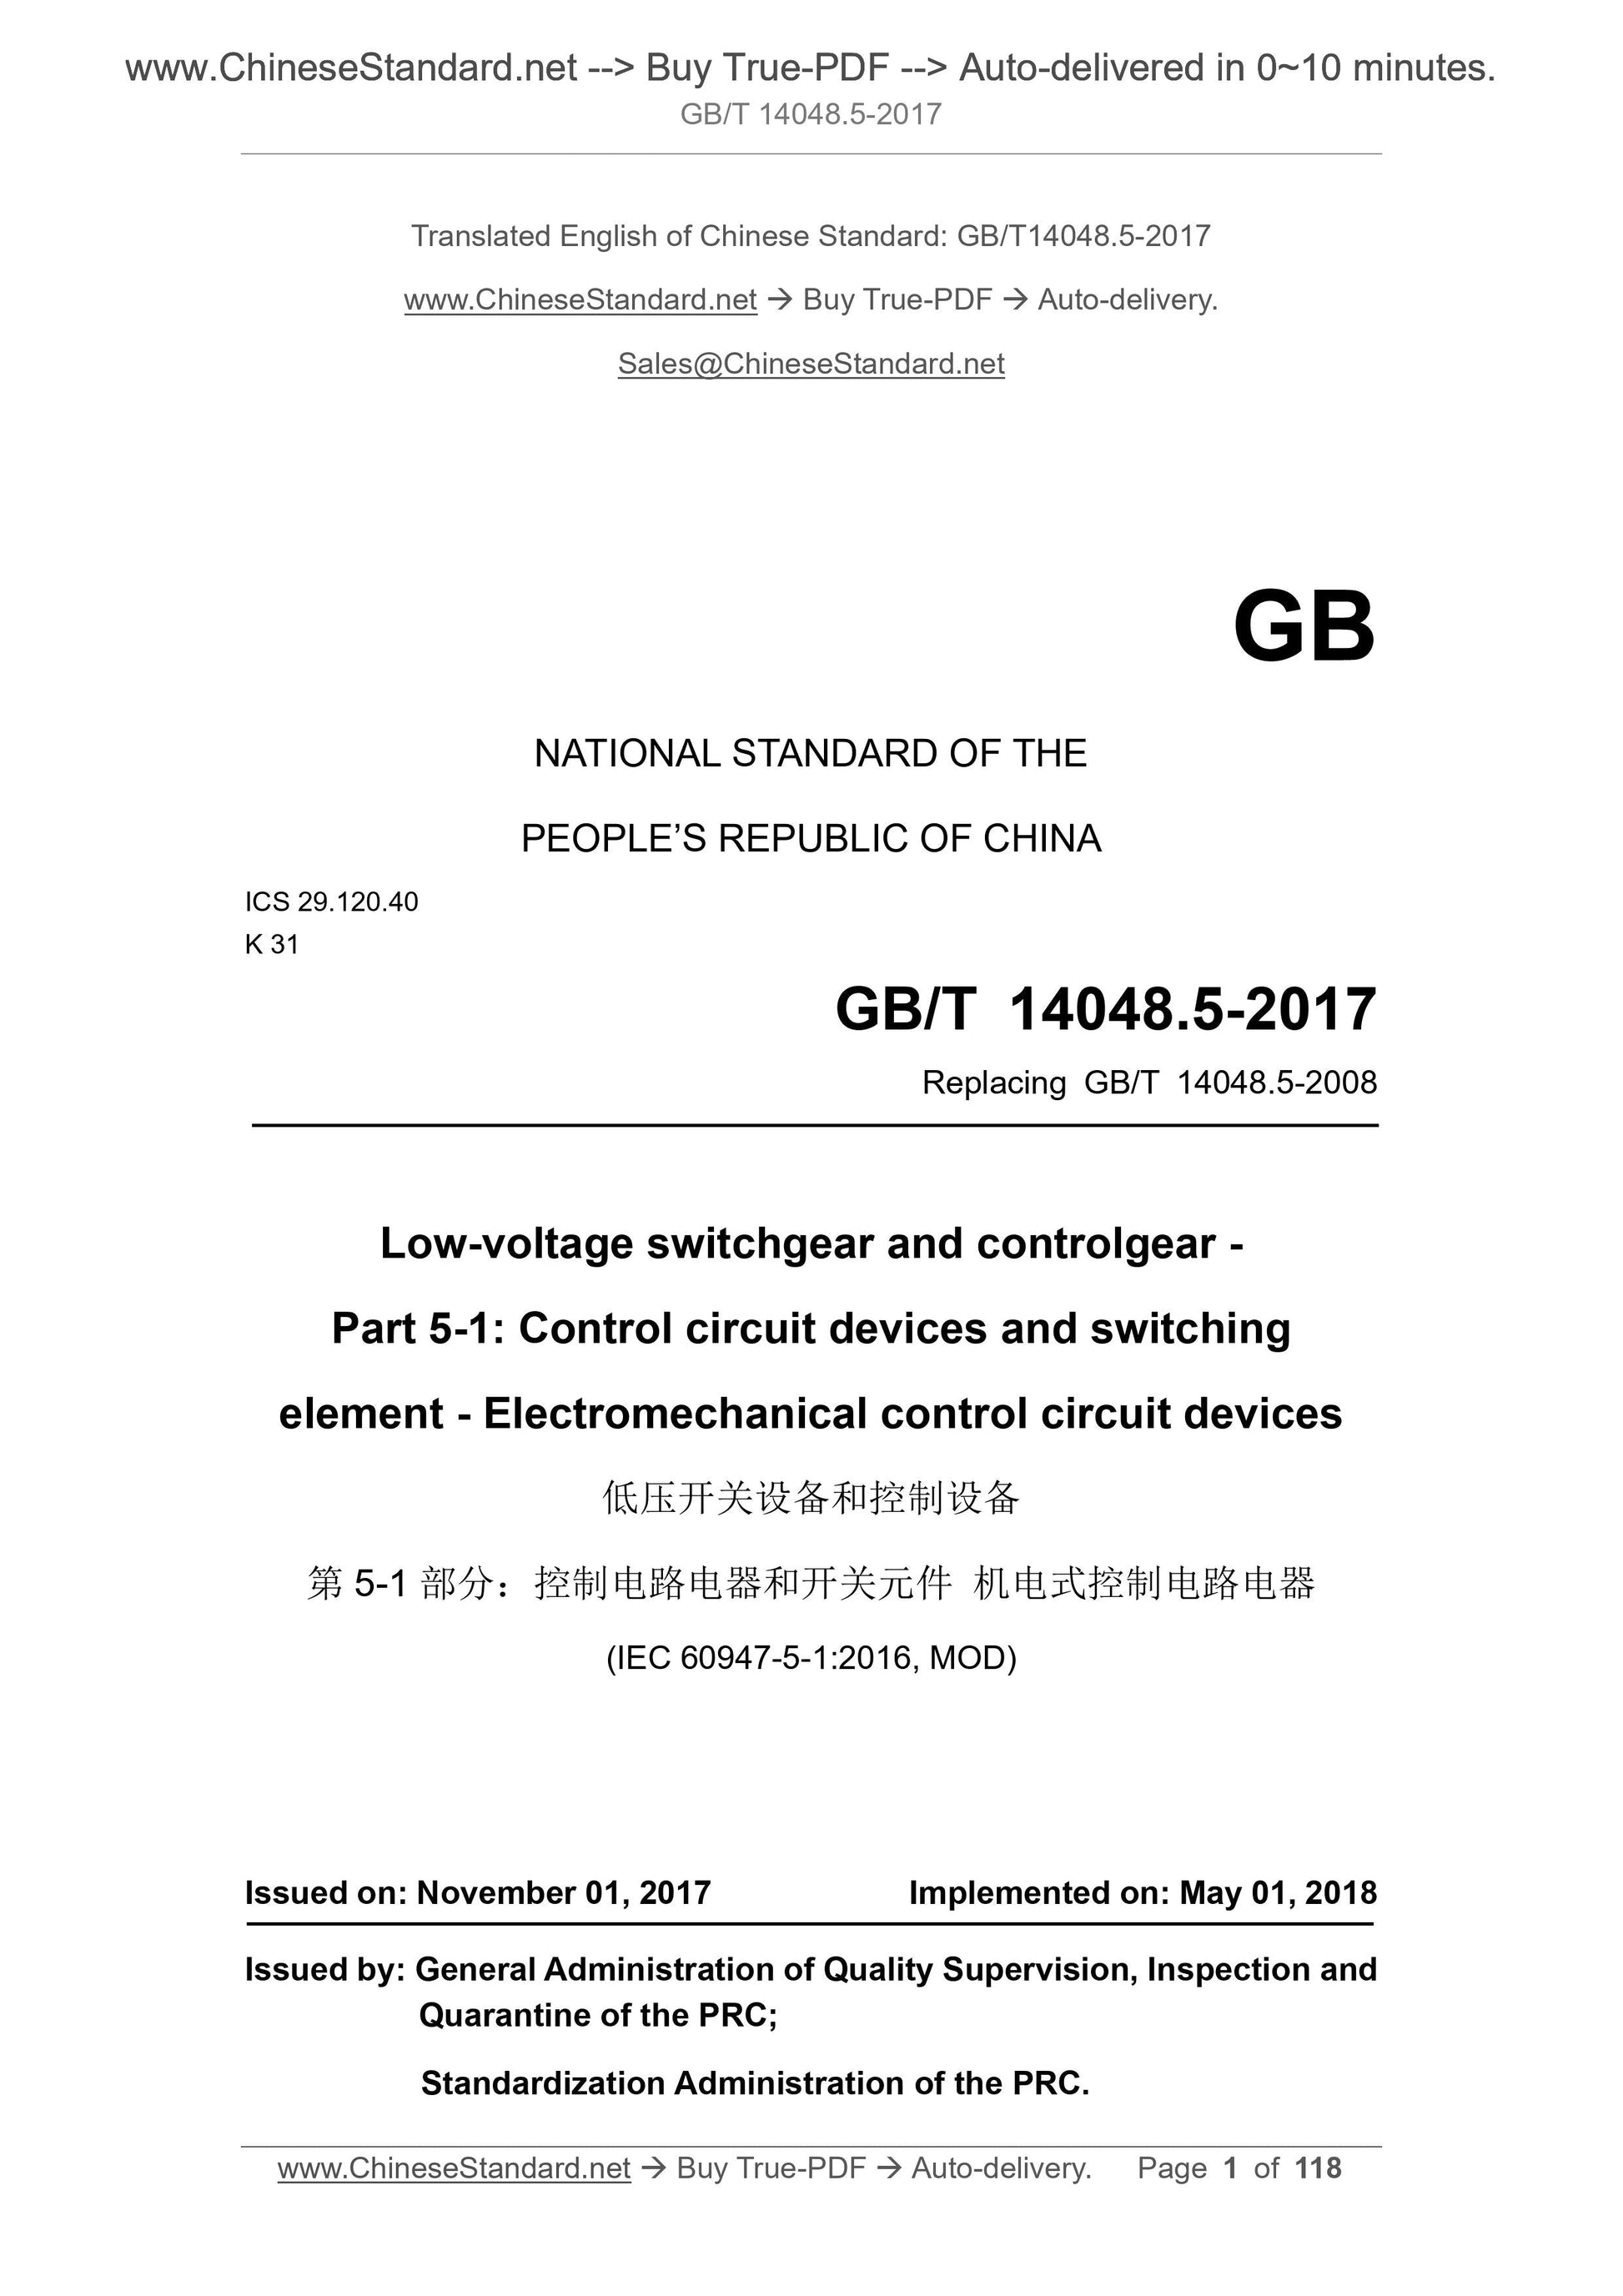 GB/T 14048.5-2017 Page 1